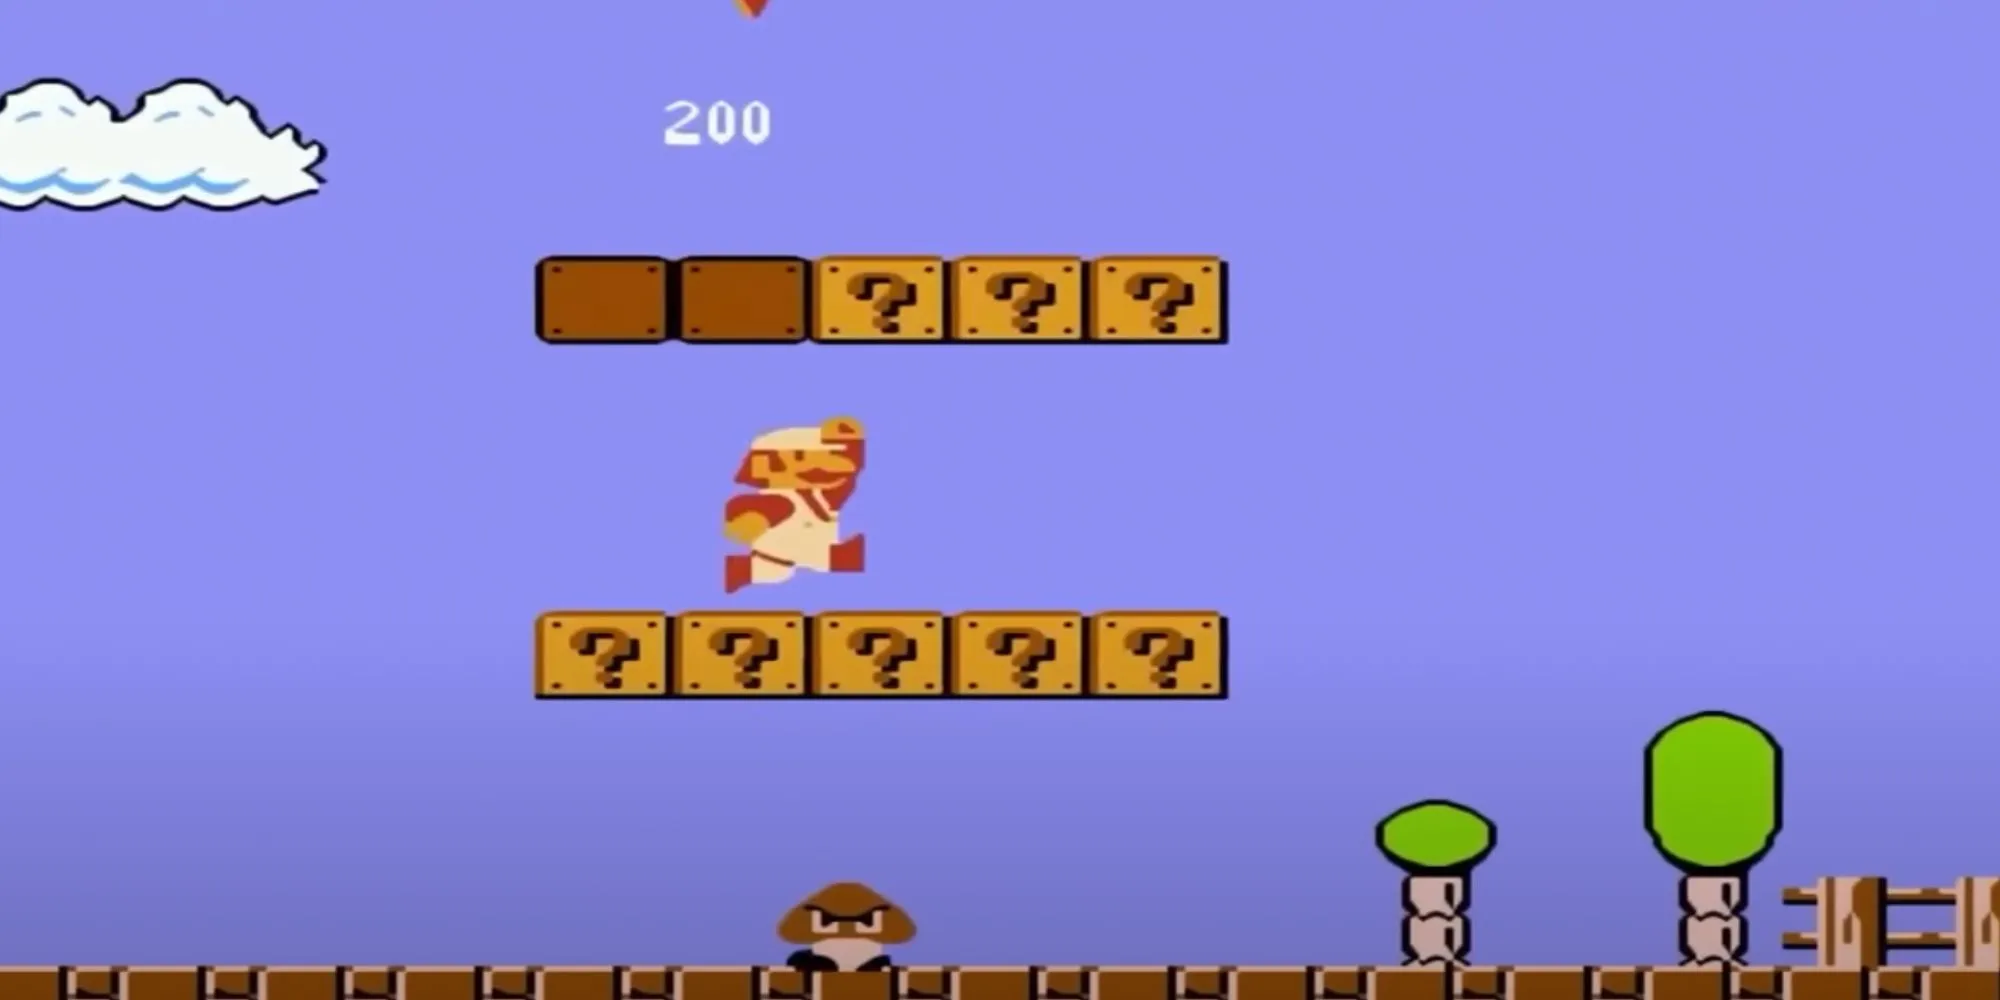 Mario jumping up in a level from the original 1985 Super Mario Bros.